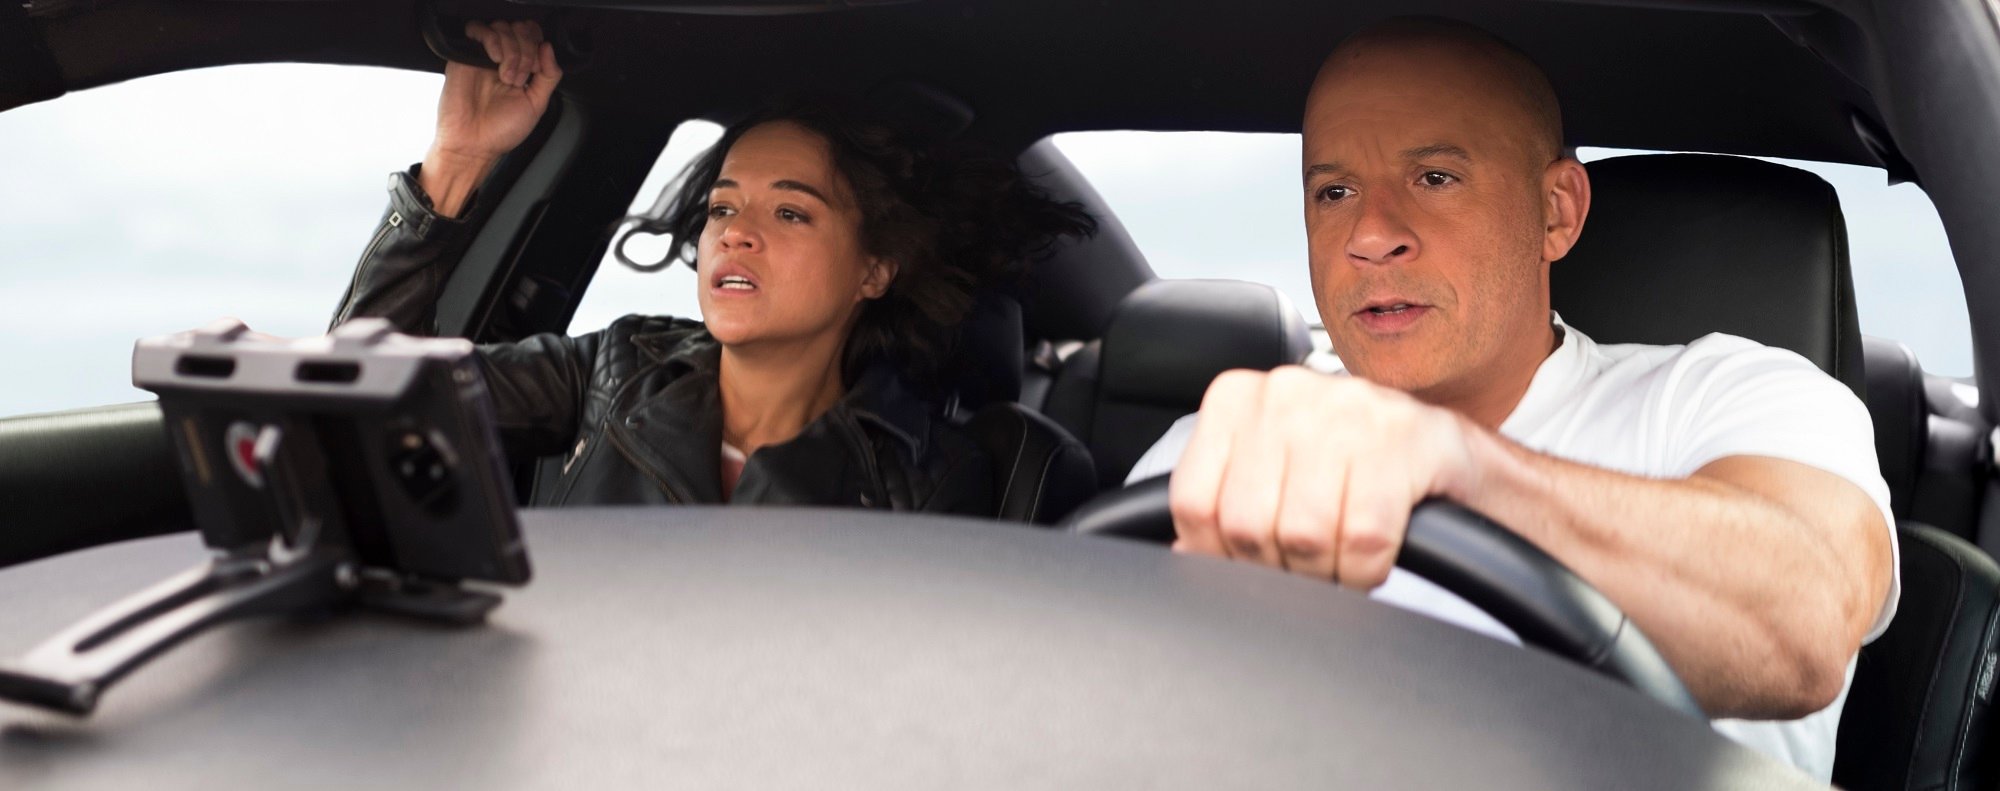 F9: Vin Diesel behind the wheel and Michelle Rodriguez in the passenger seat